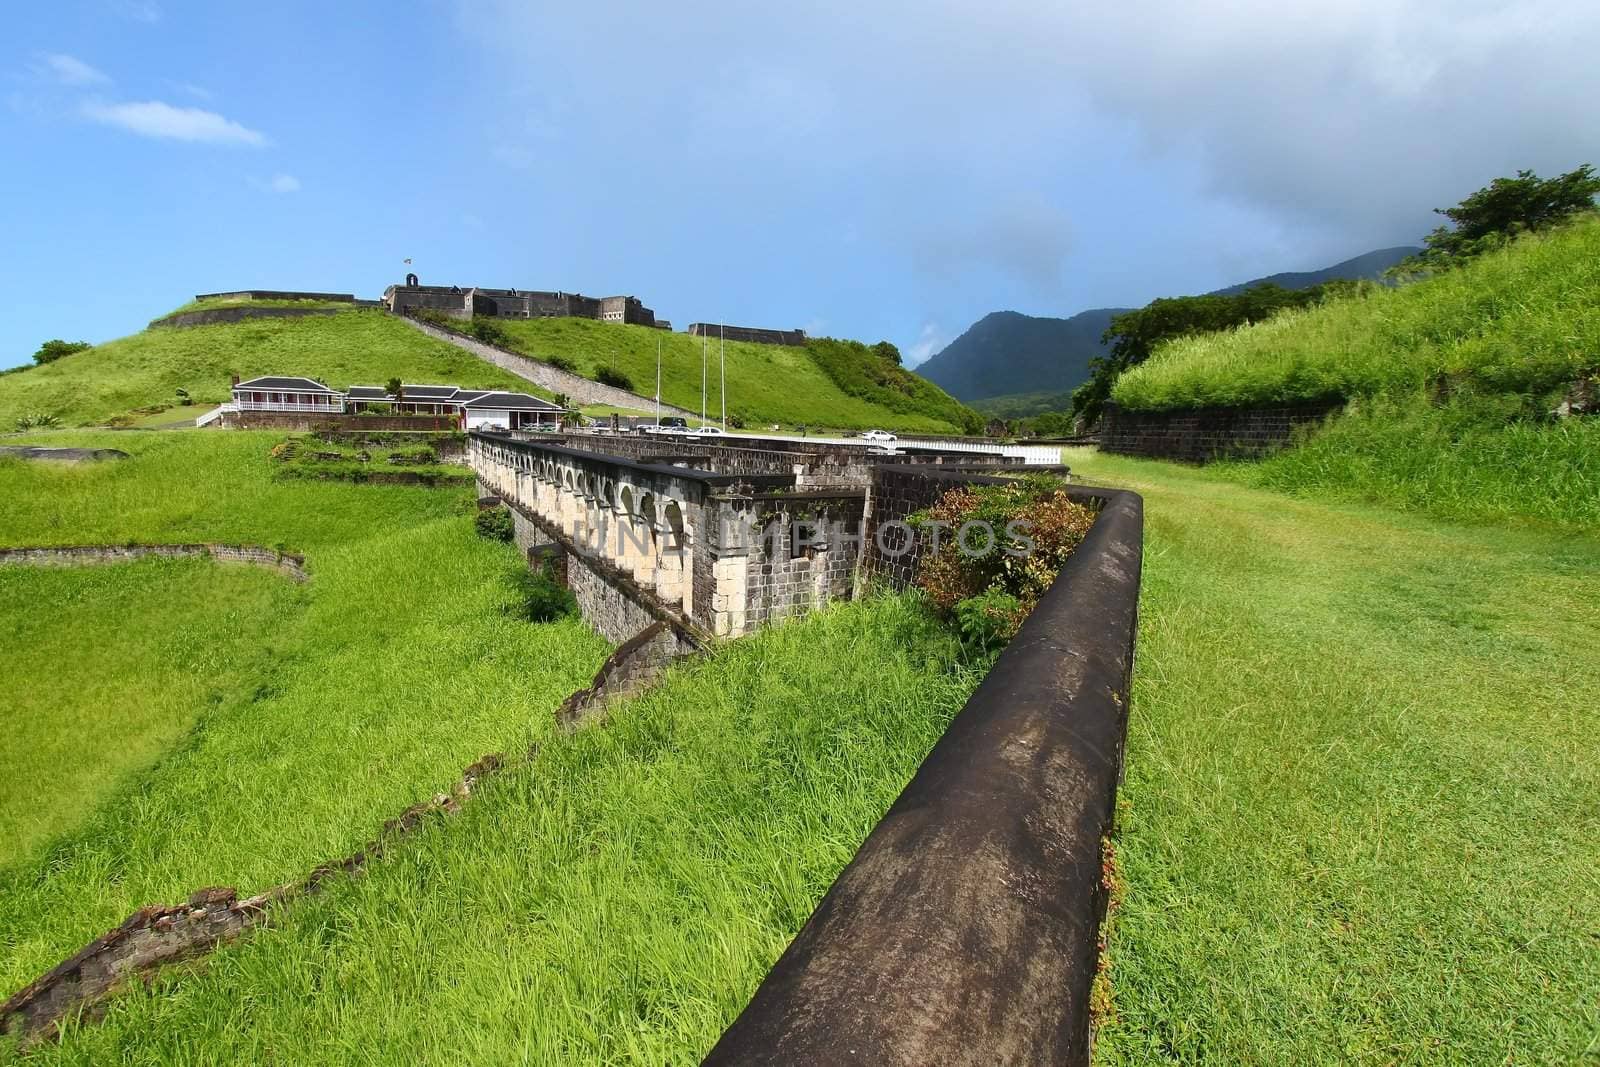 The walls of Brimstone Hill Fortress on the Caribbean island of St Kitts.